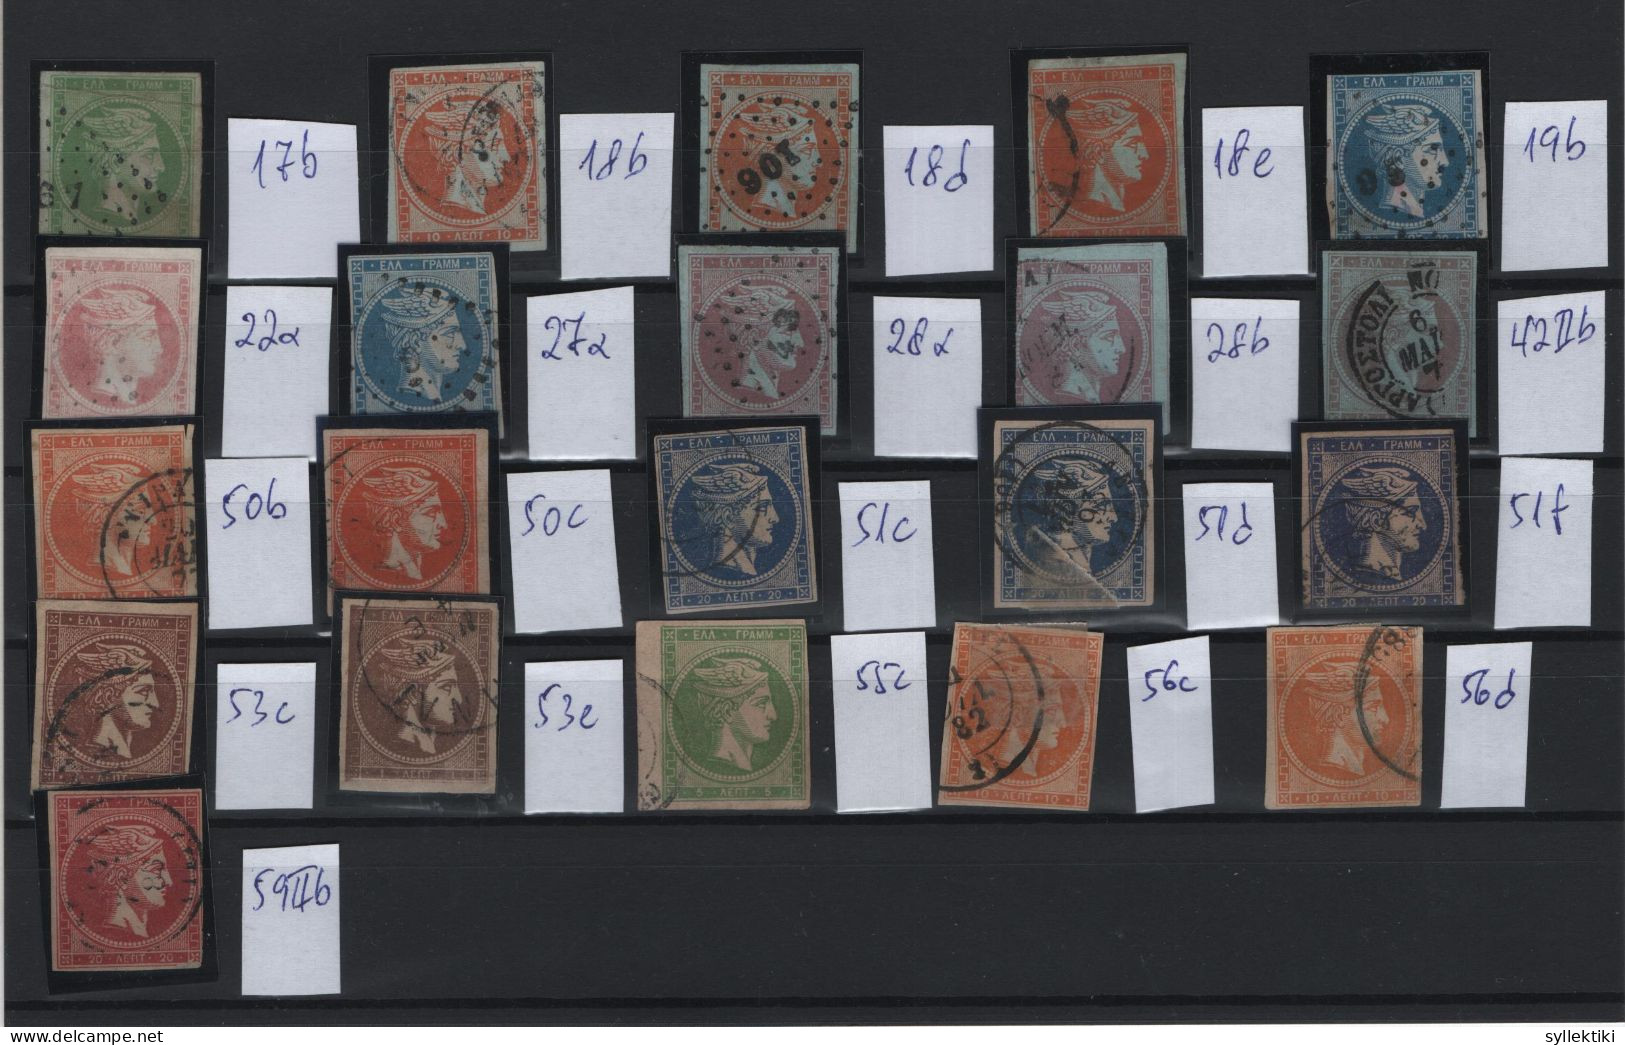 GREECE 1862- 1886 LARGE HERMES HEAD COLLECTION OF 21 DIFFERENT USED STAMPS  HELLAS CATALOGUE VALUE EURO 496.00 - Usados